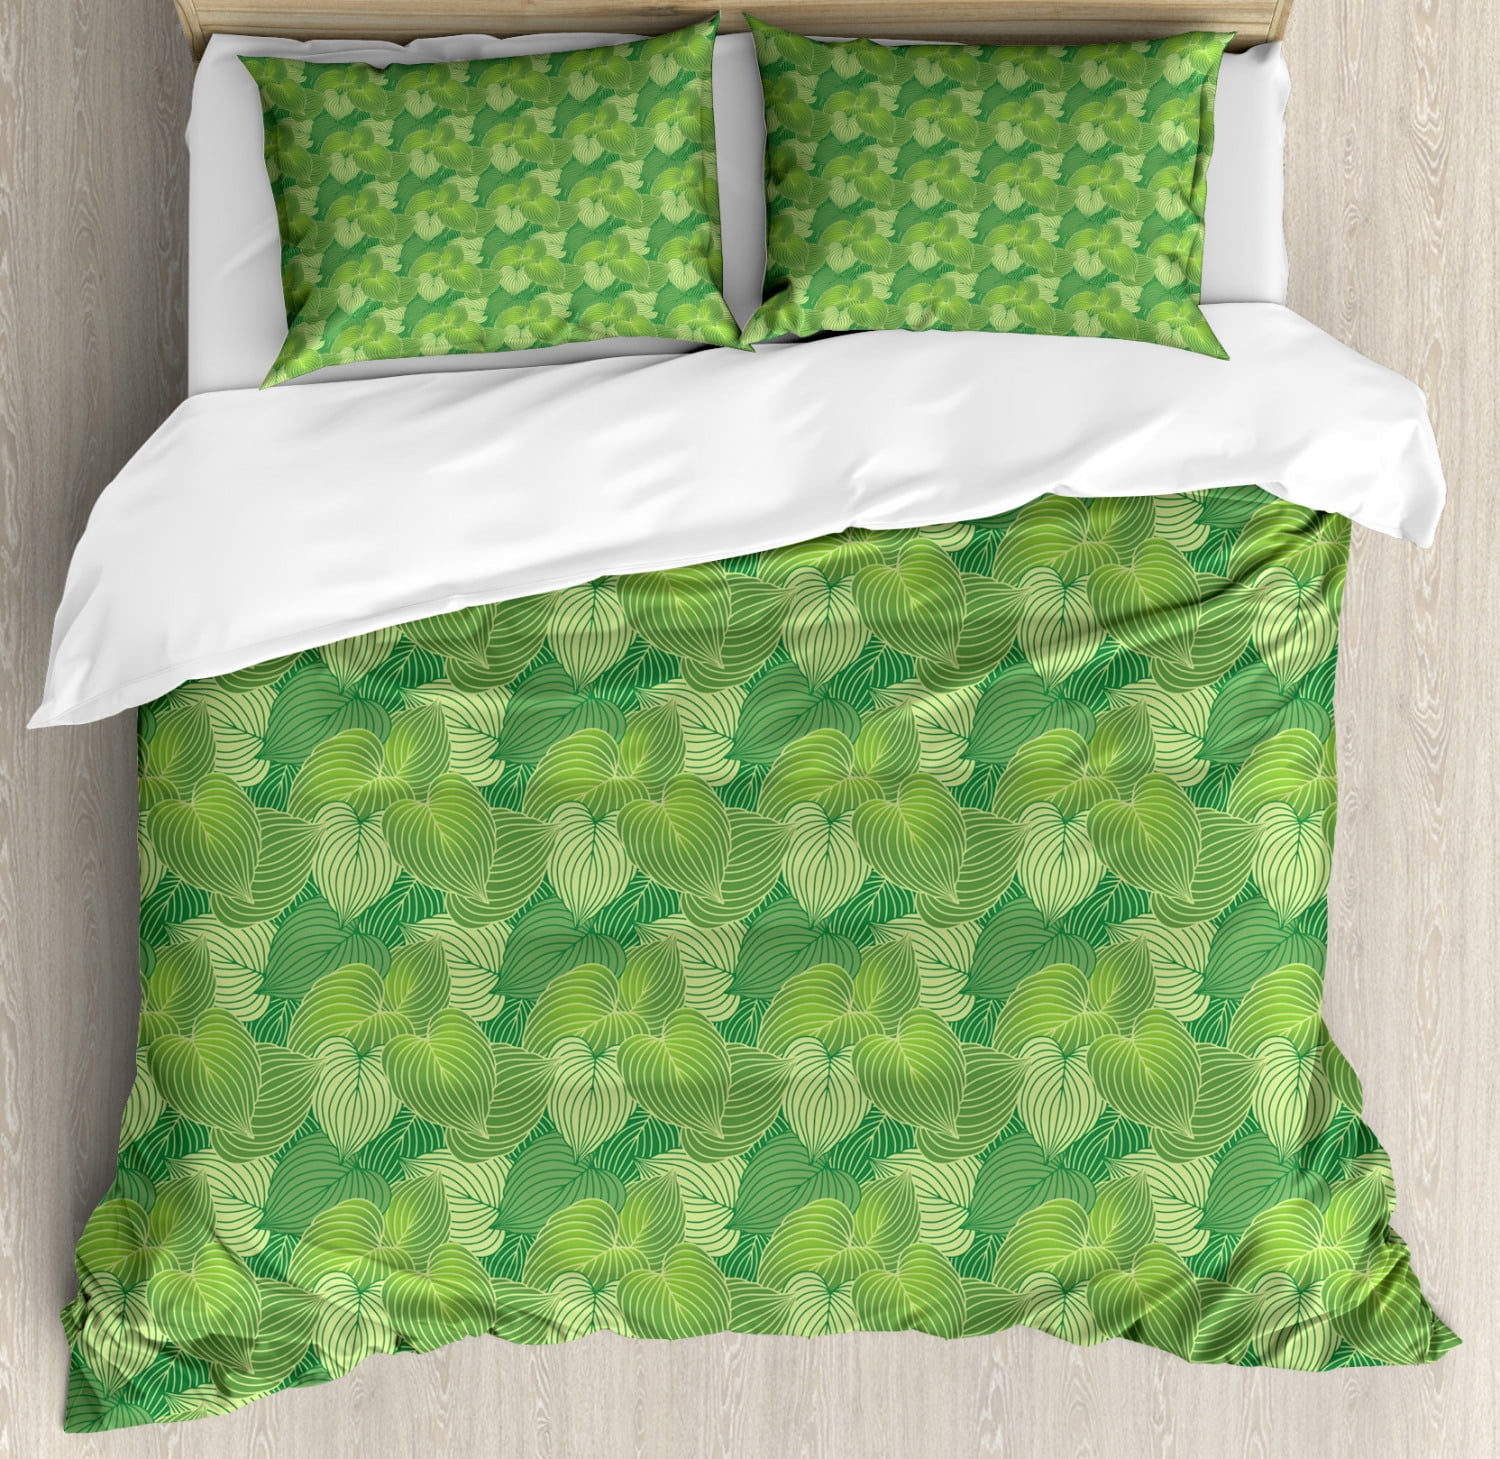 Green King Size Duvet Cover Set Abstract Hosta Plants Lush Forest